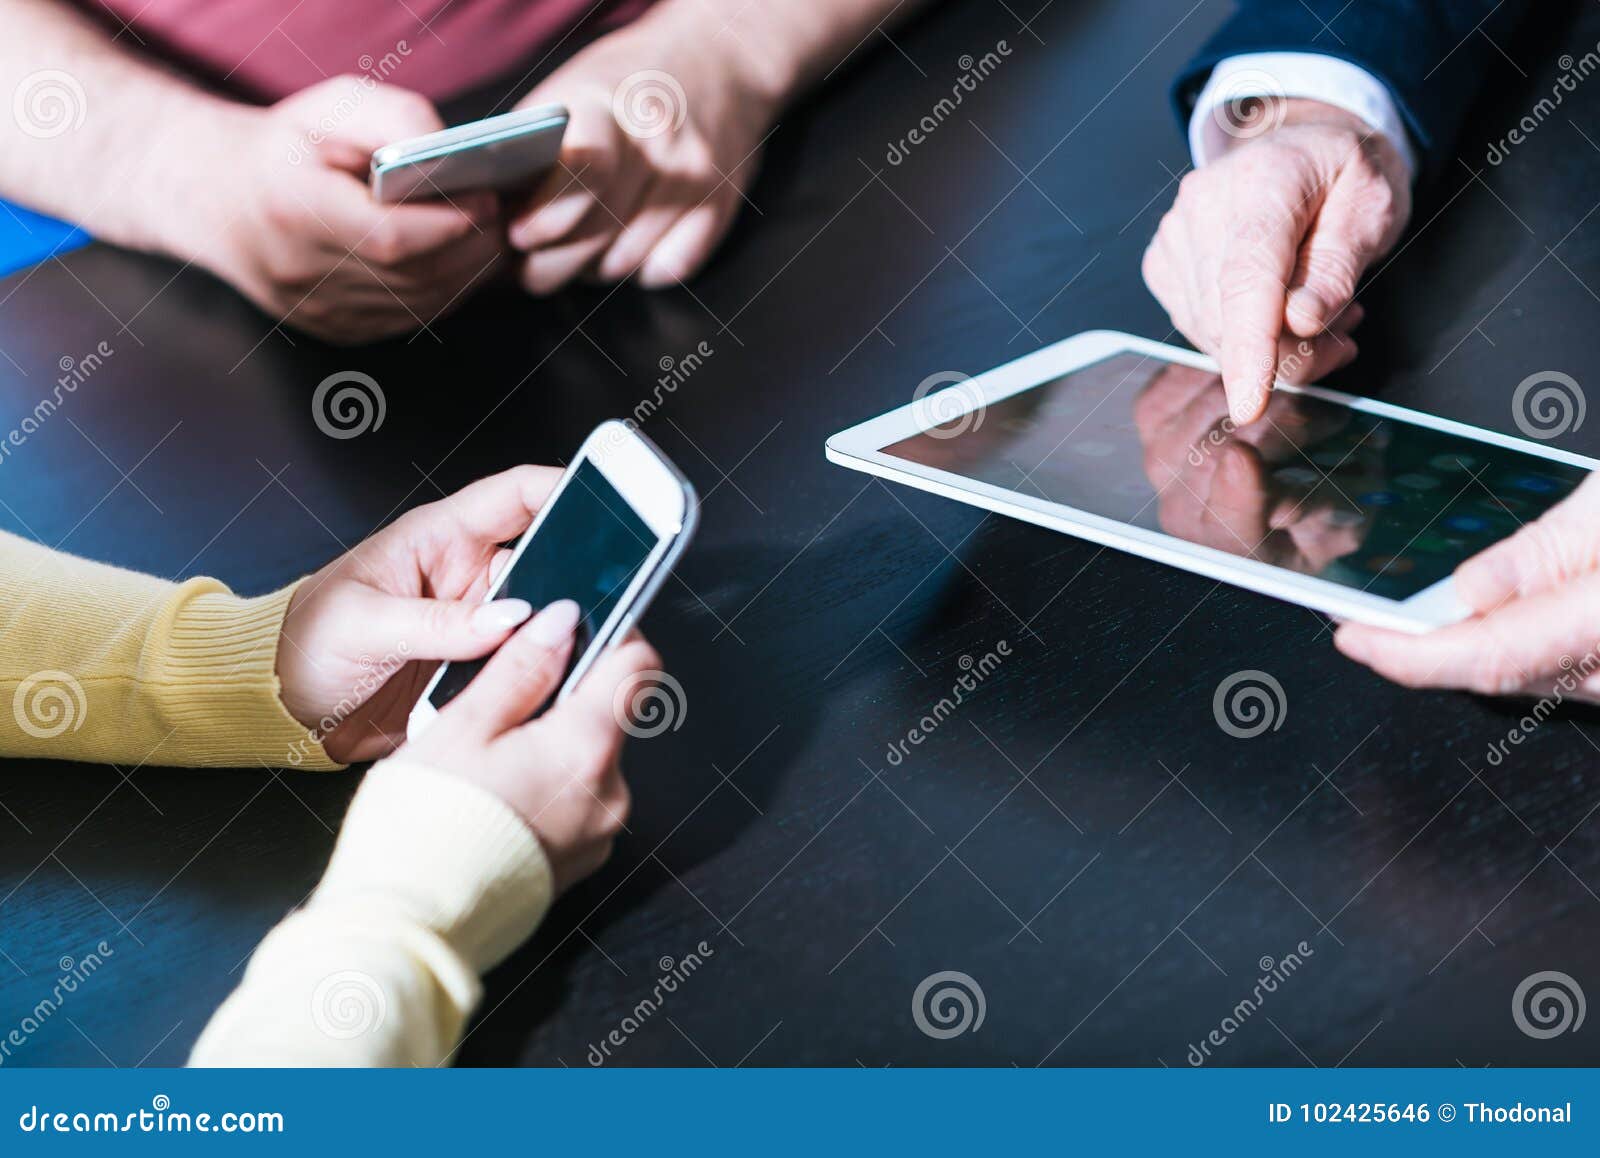 people hands using mobile phones and digital tablet